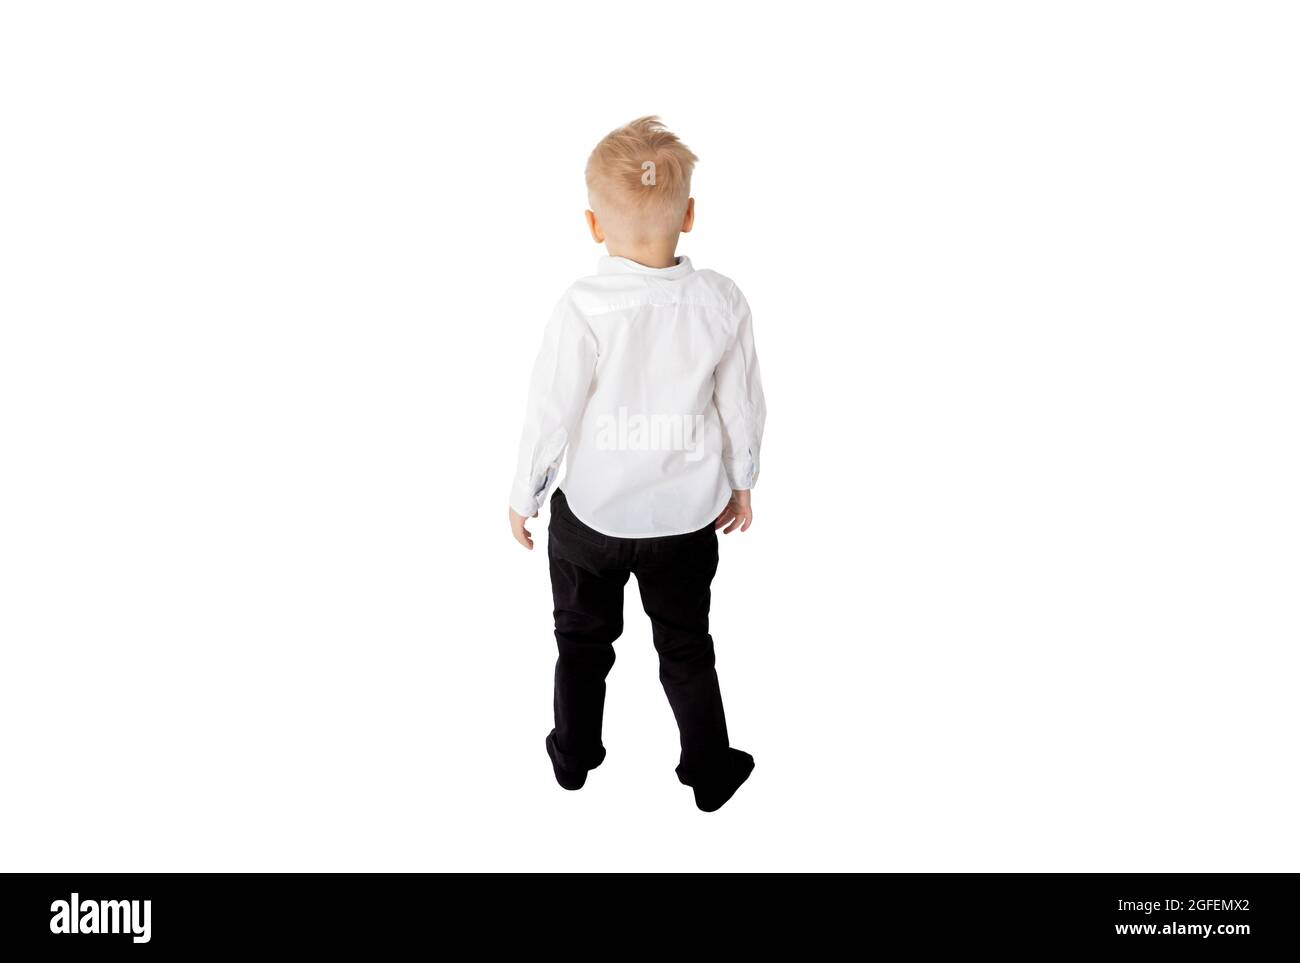 boy looking ahead isolated on white background Stock Photo